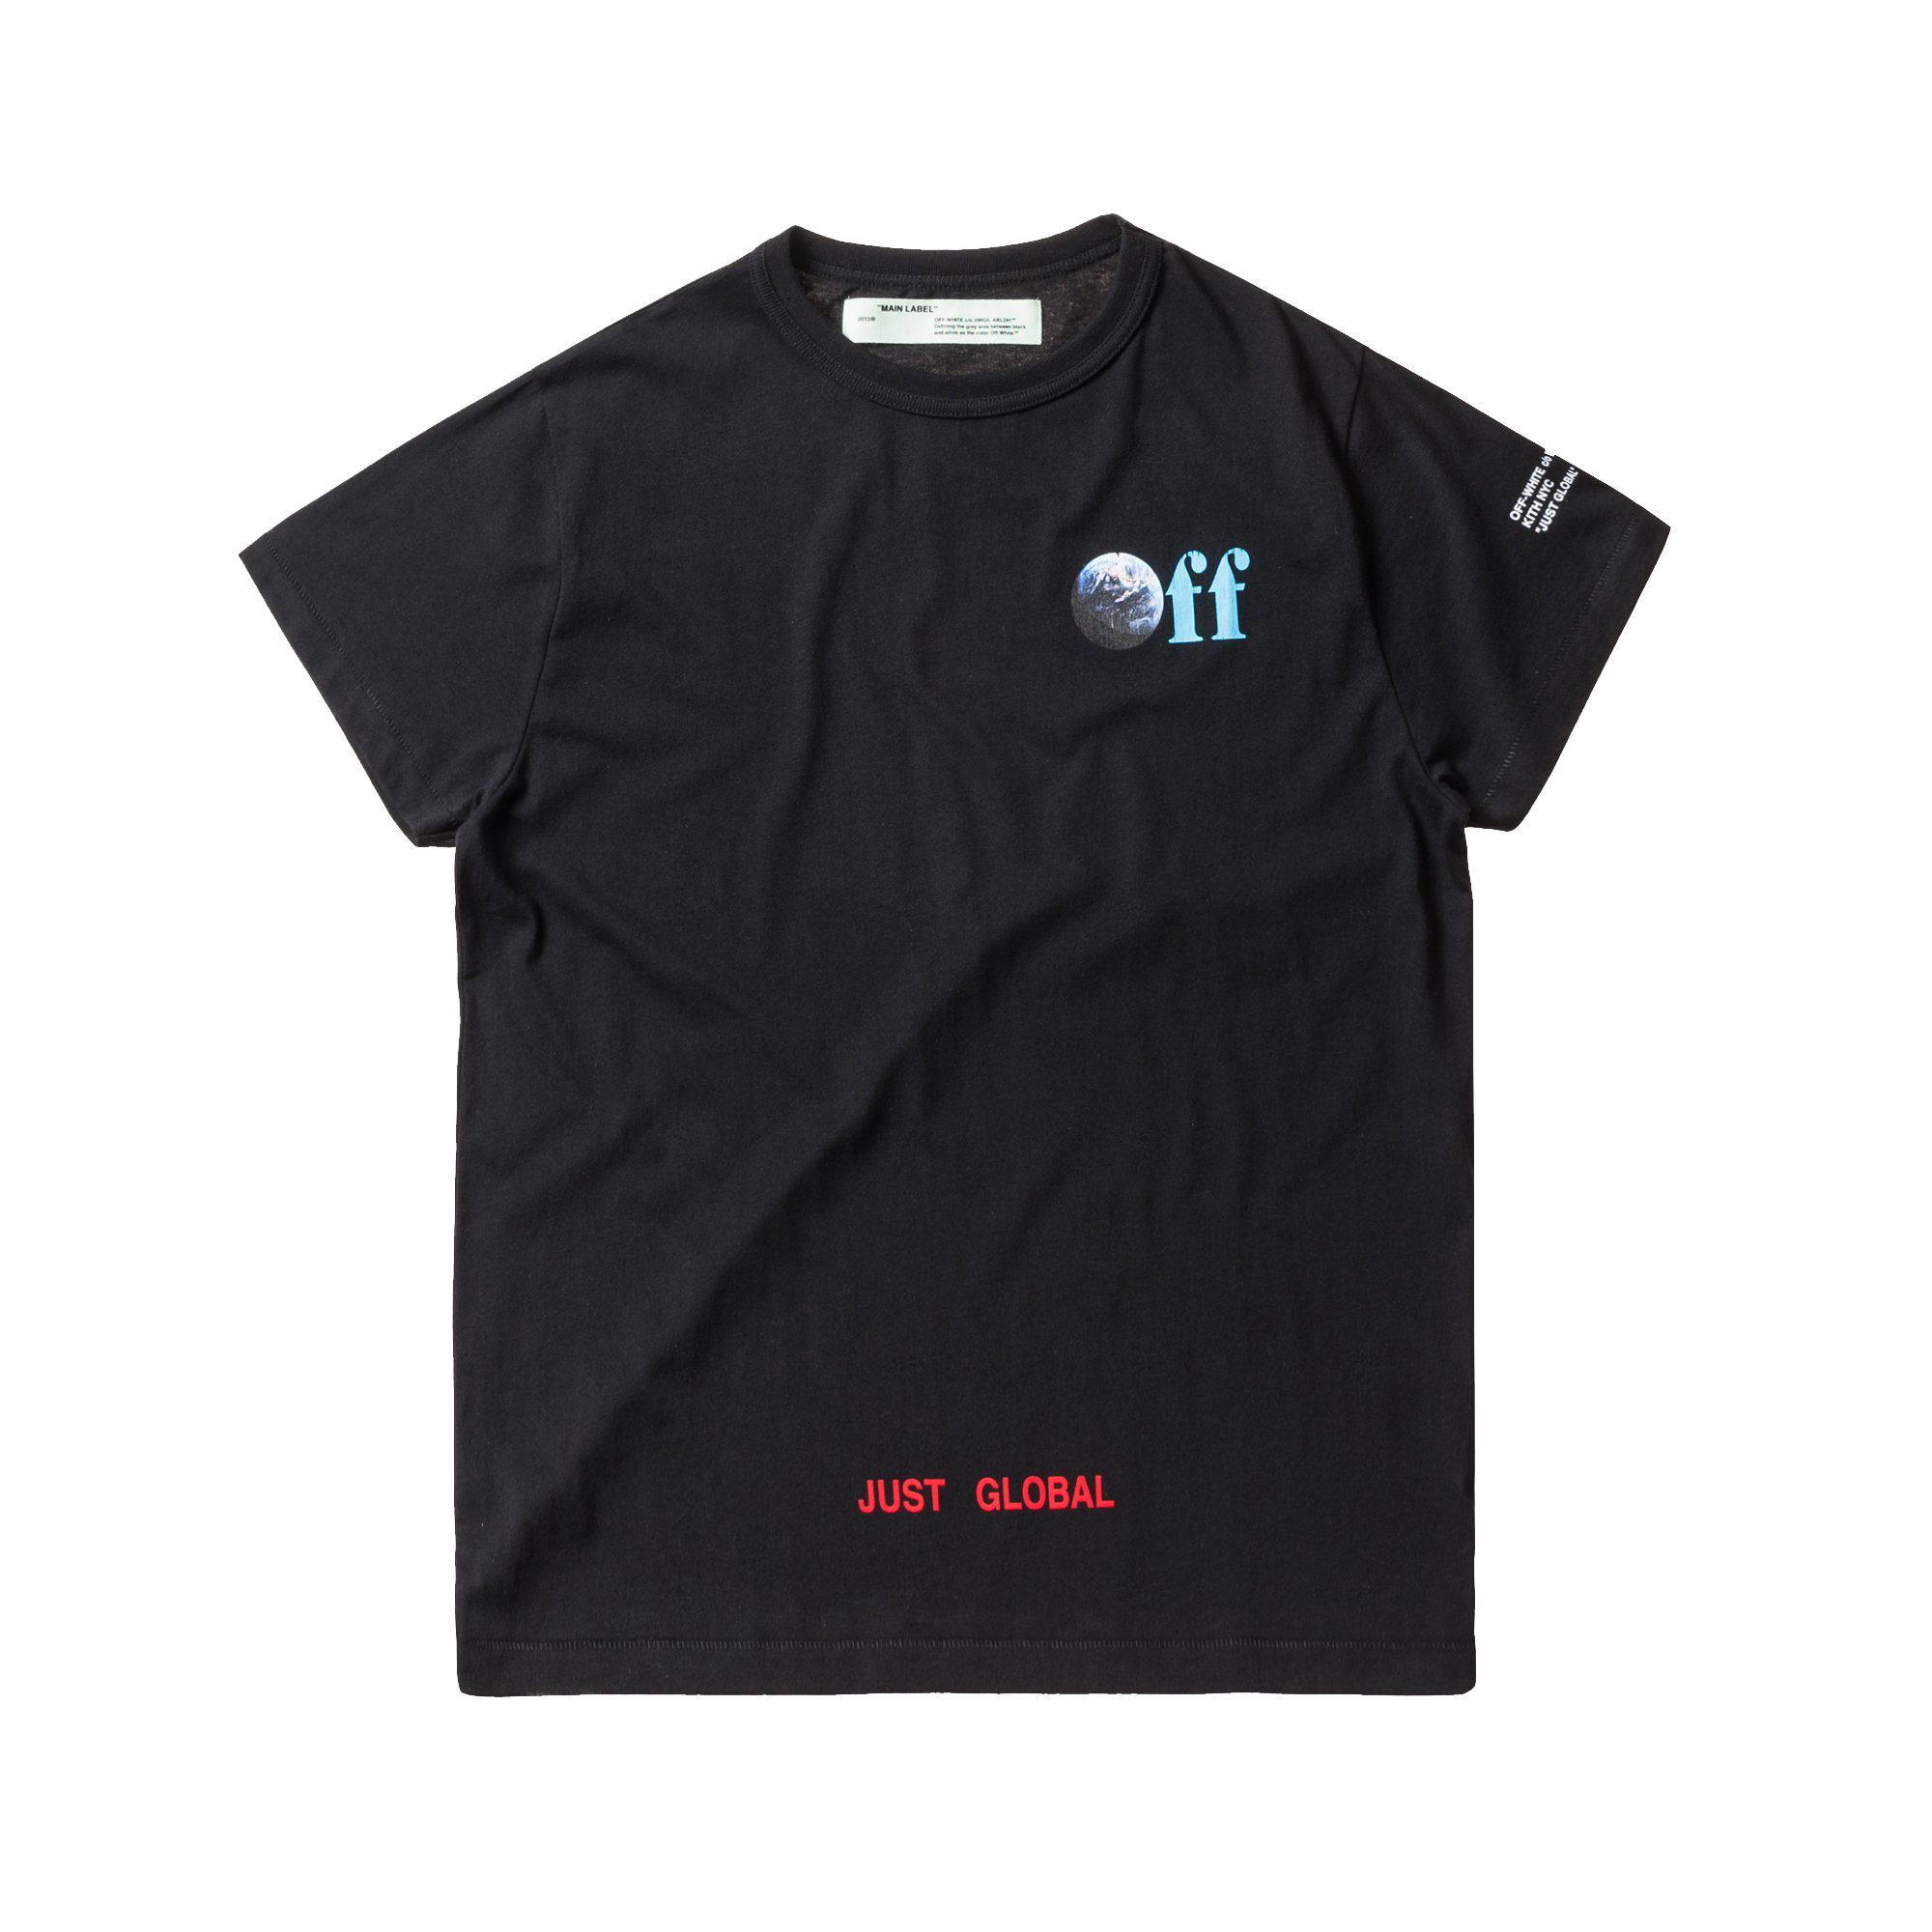 Kith Off-White Just Global Tee Black - FW17 - US